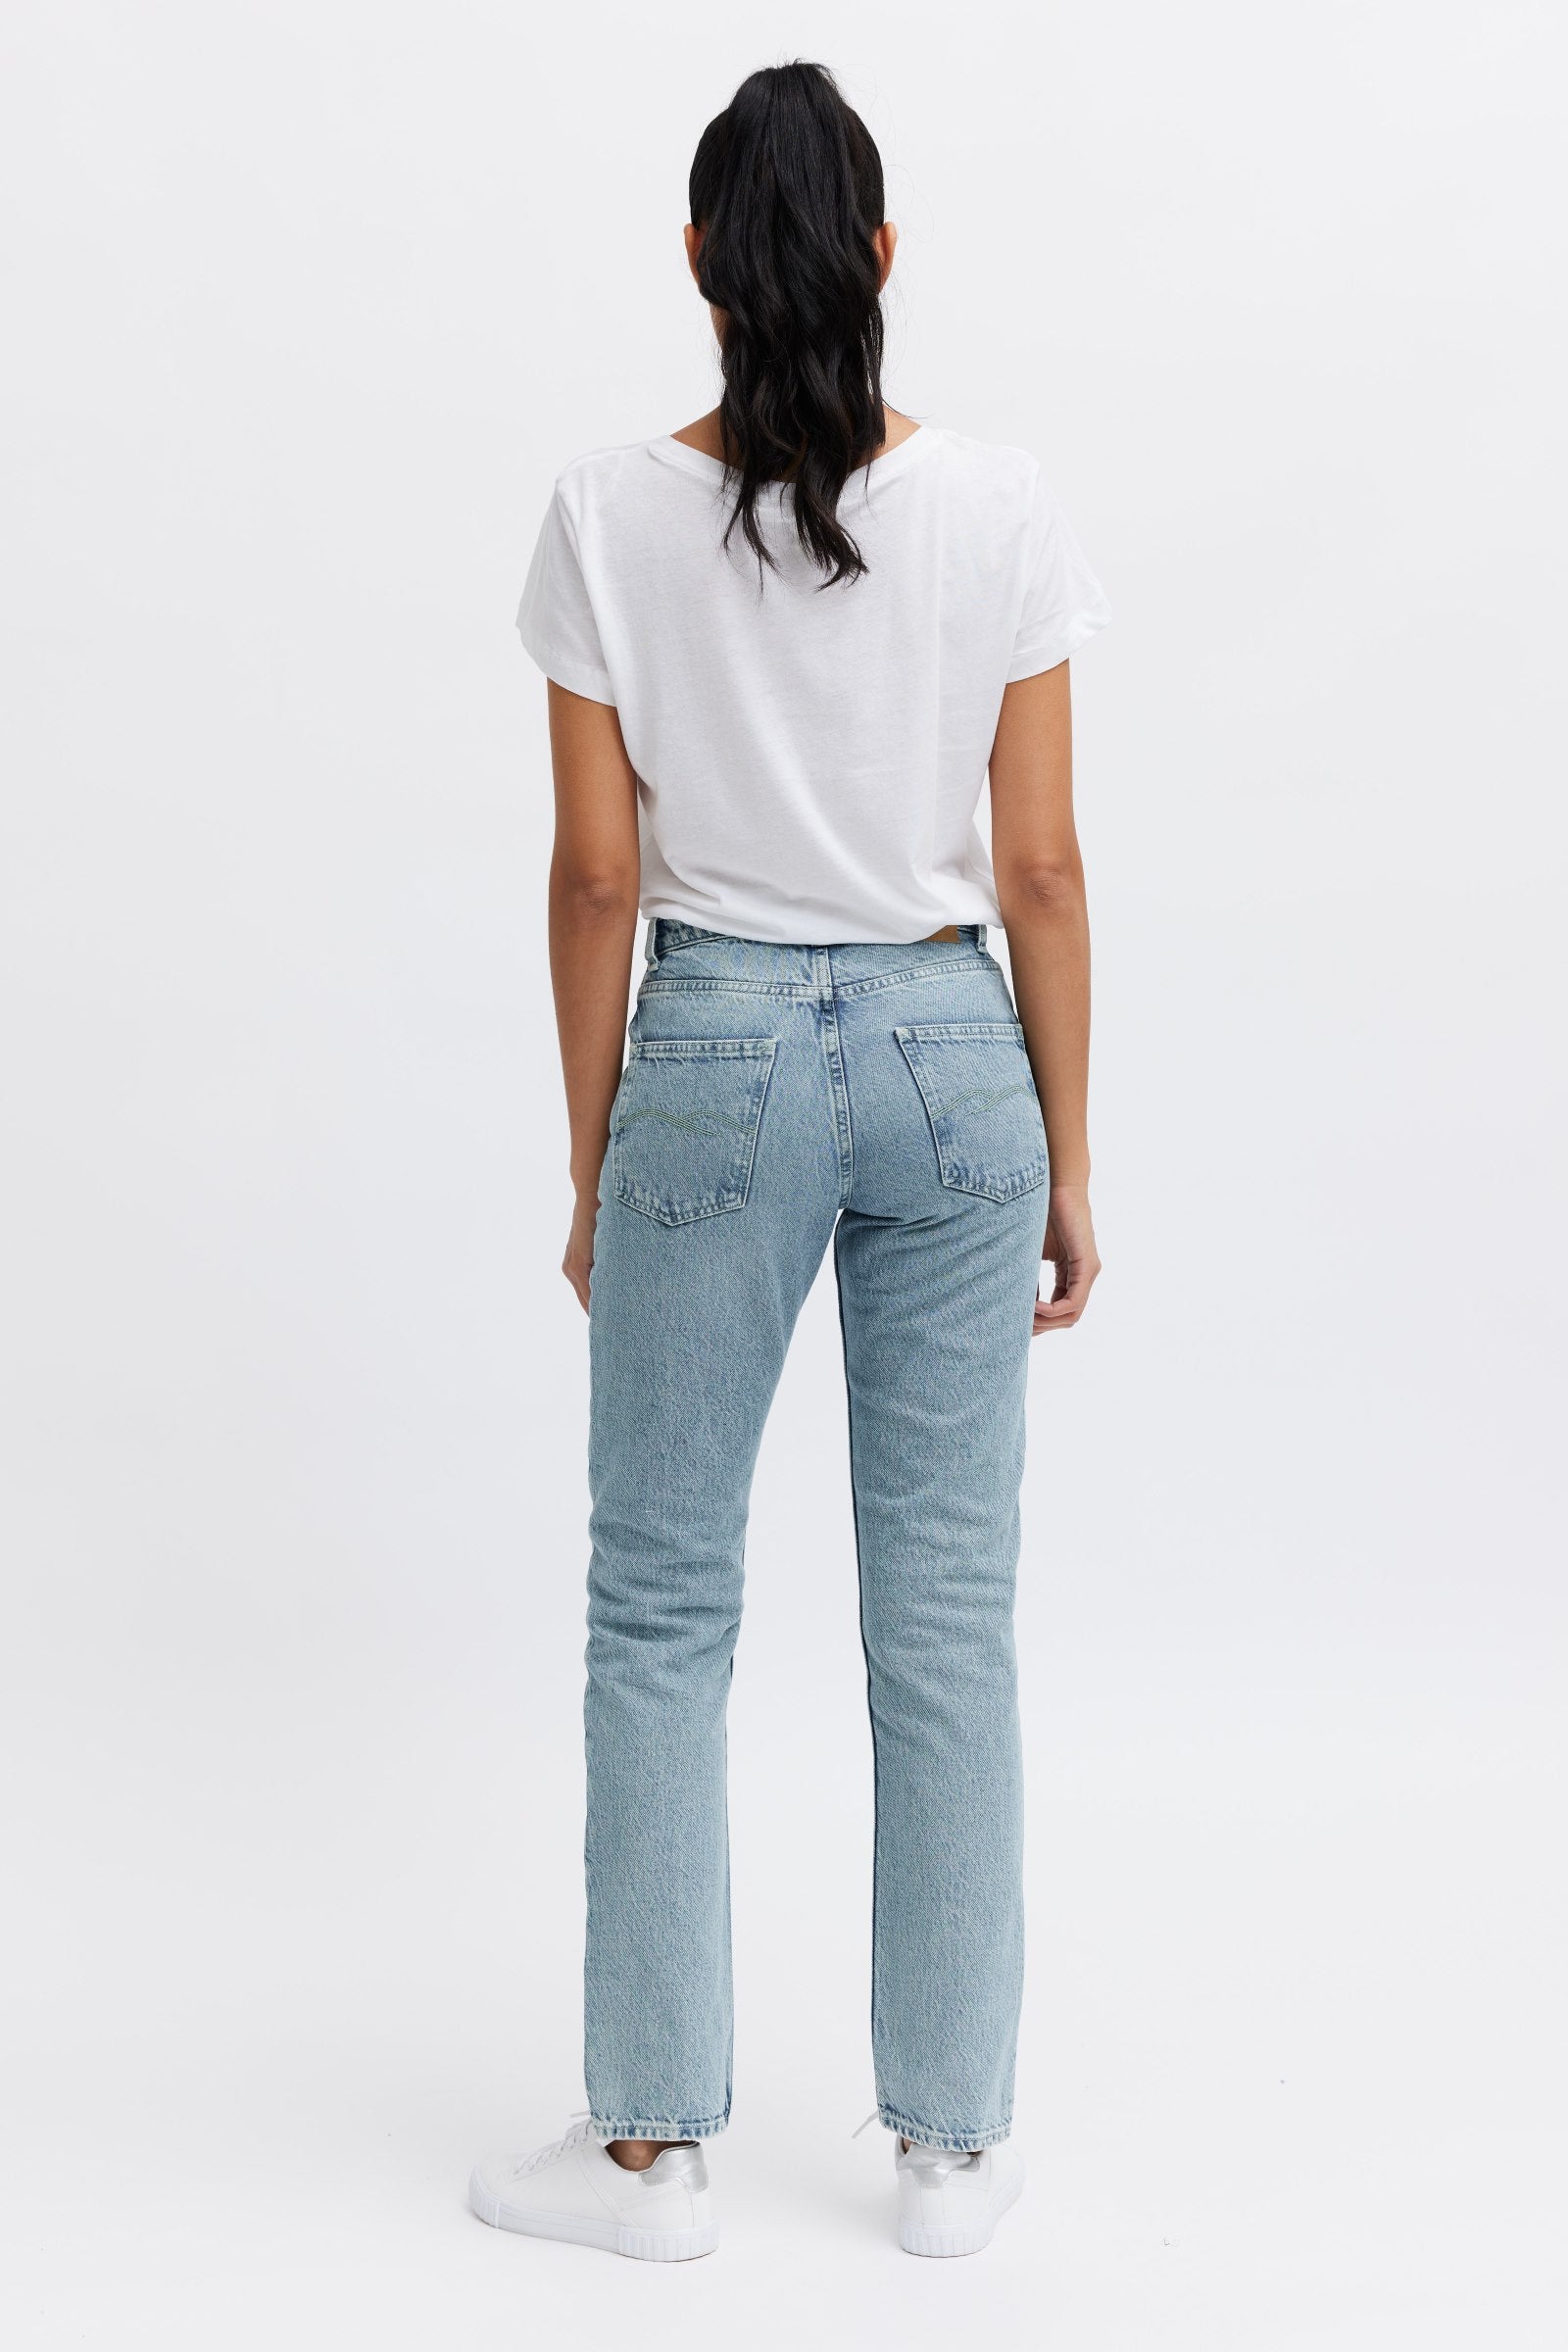 Best organic jeans for women - Sustainably made - GOTS certified denim